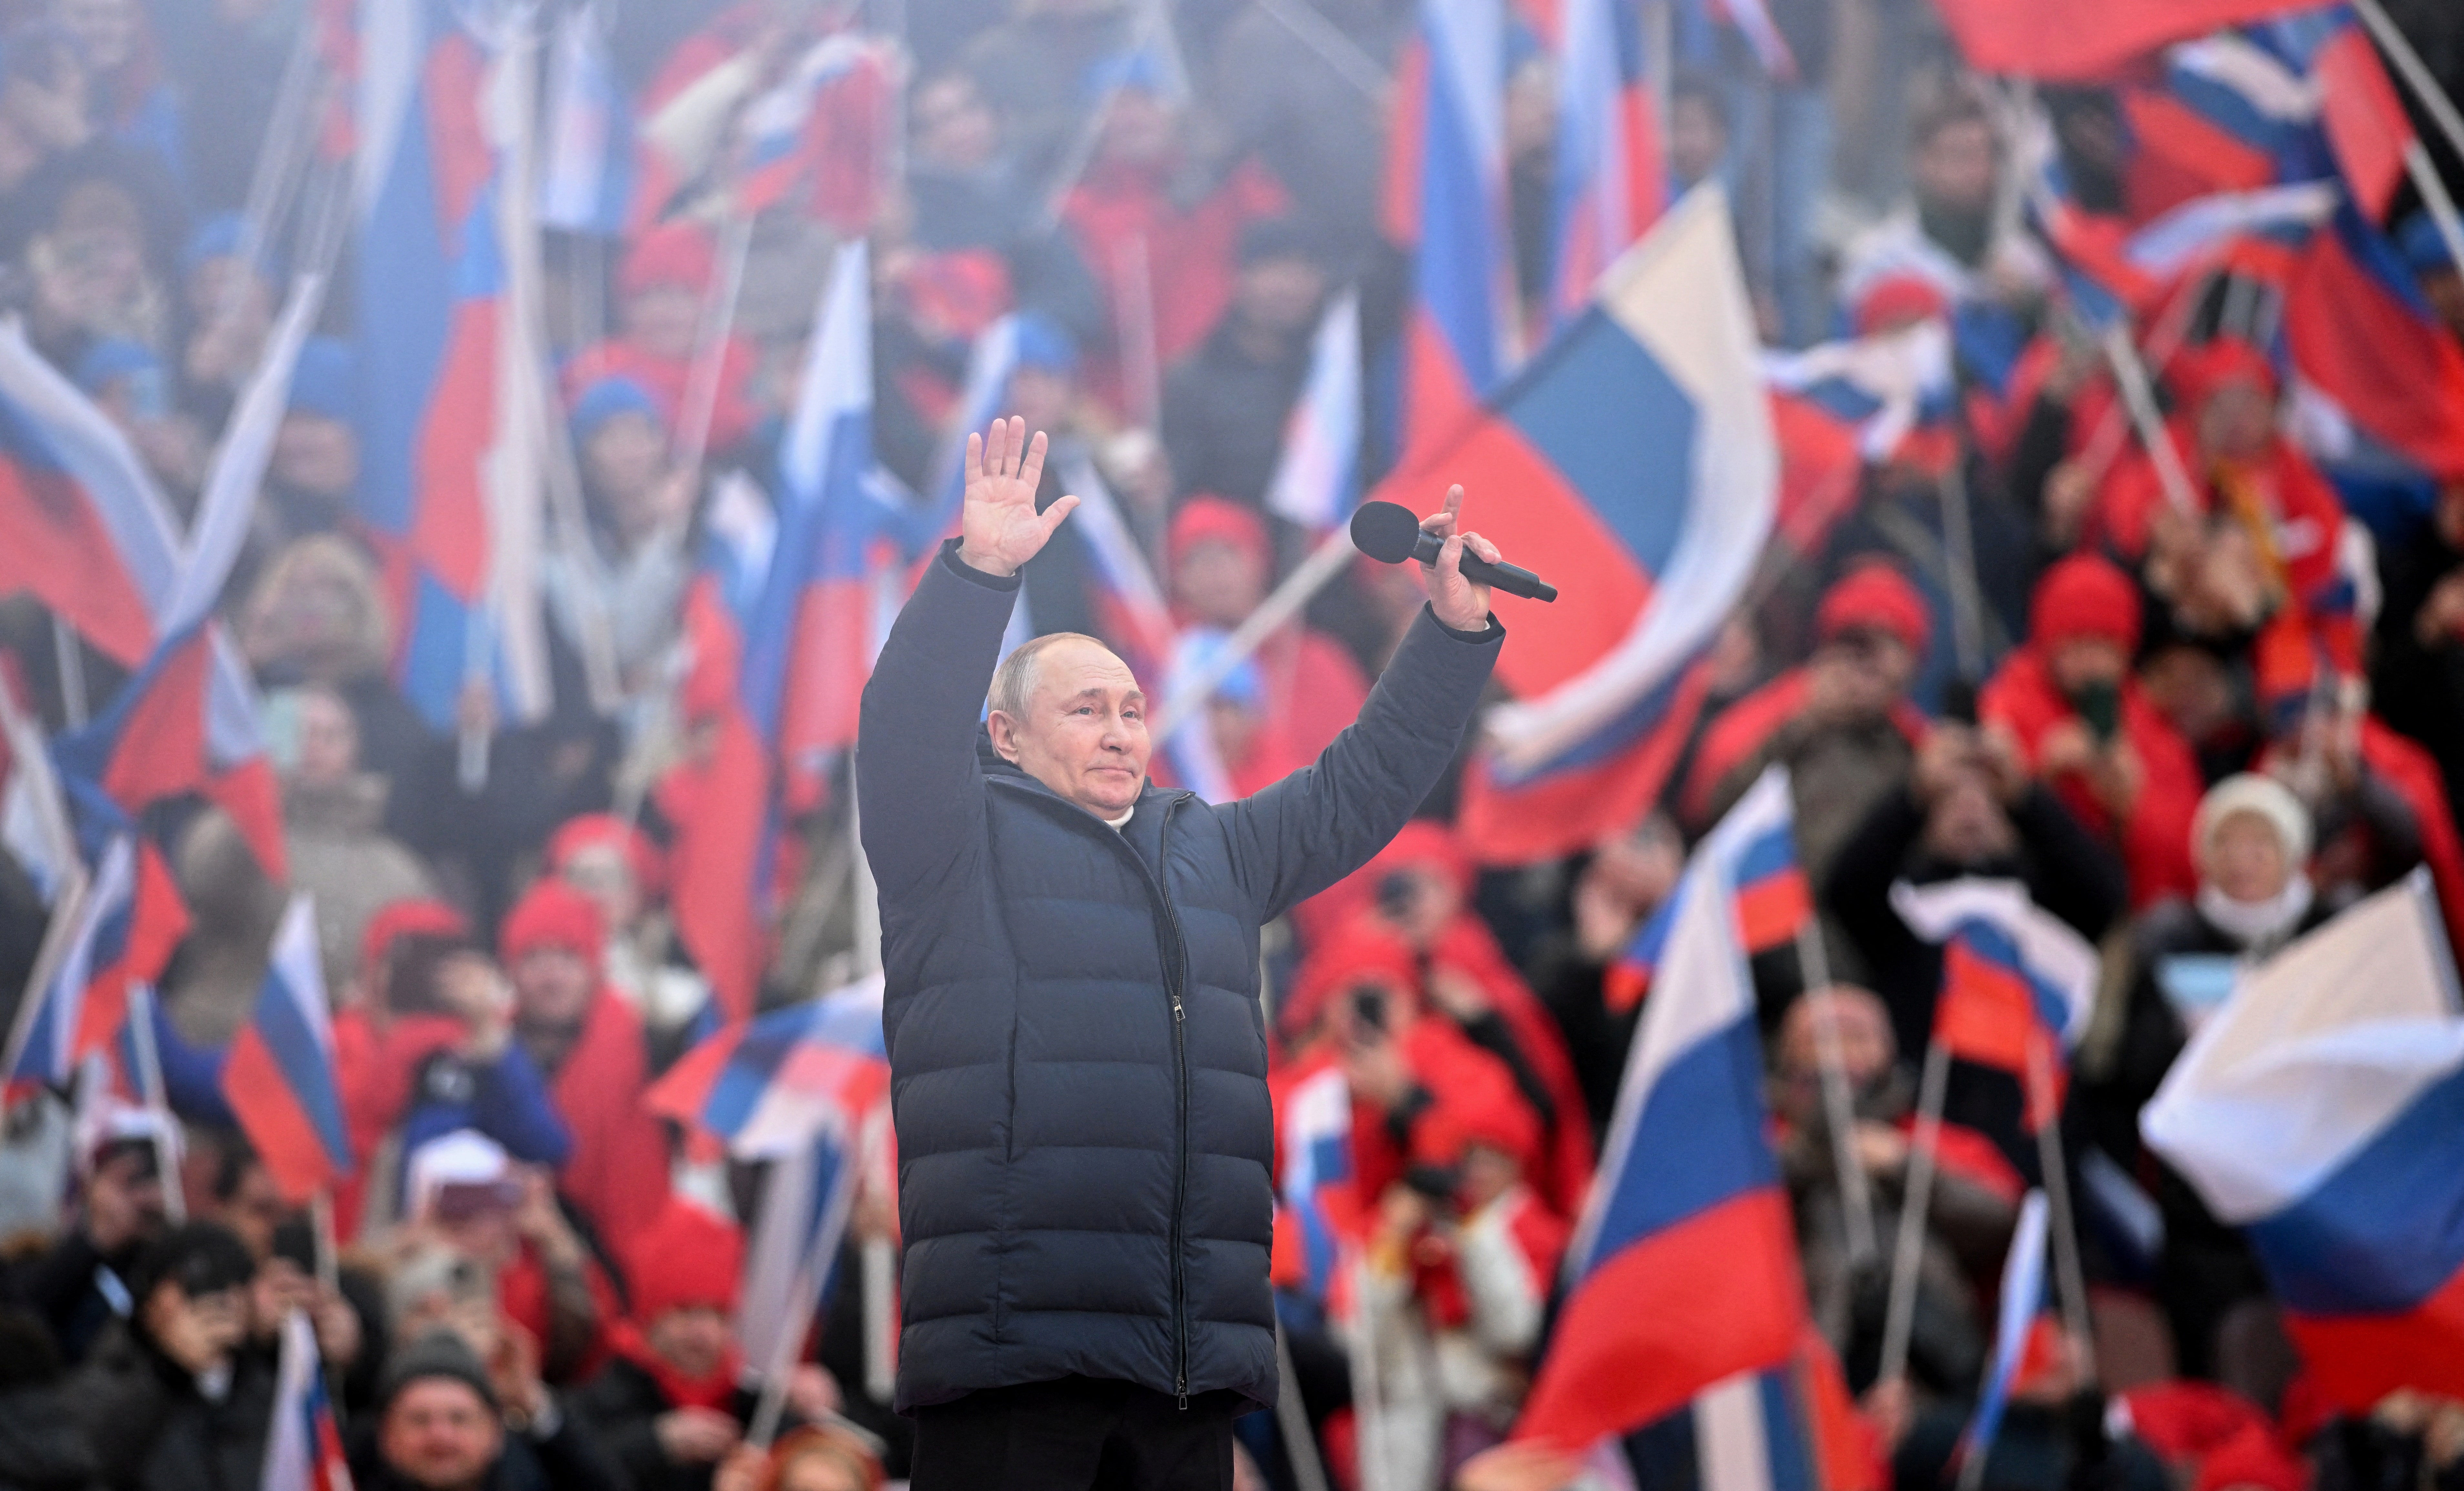 Putin appears at huge pro-war rally as Russian troops continue attack on Ukraine